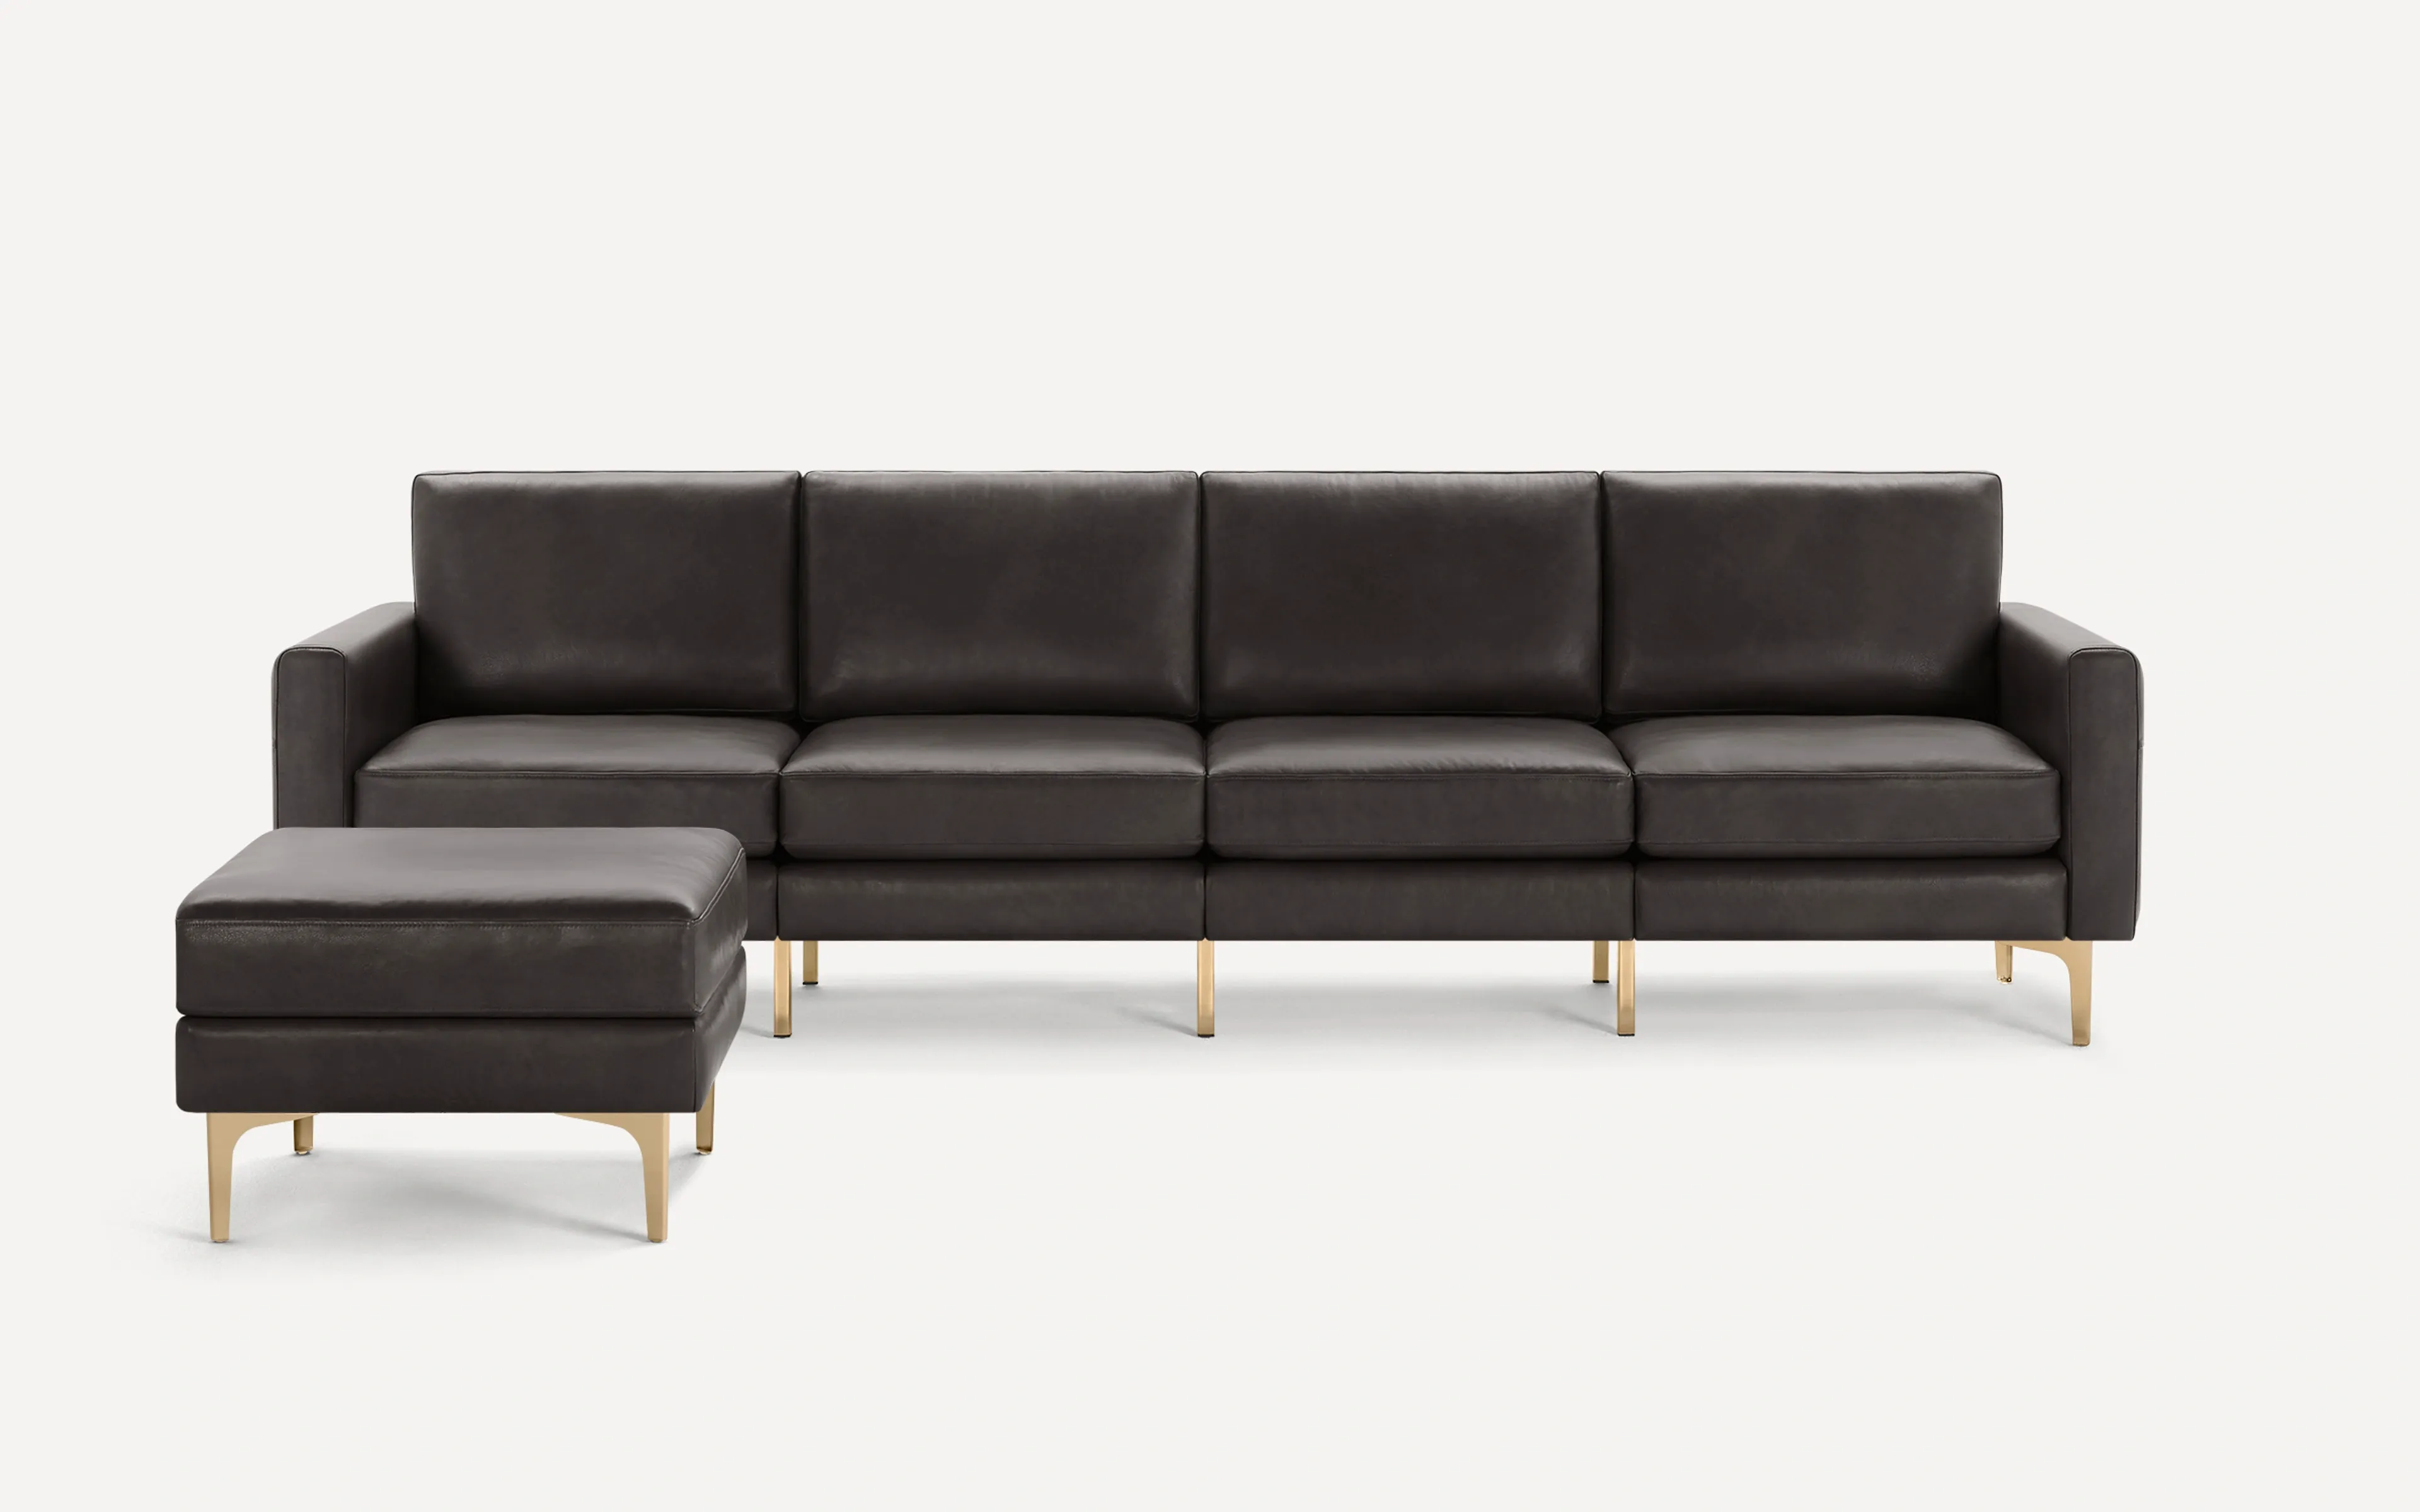 Original Nomad King Sofa with Ottoman in Slate Leather